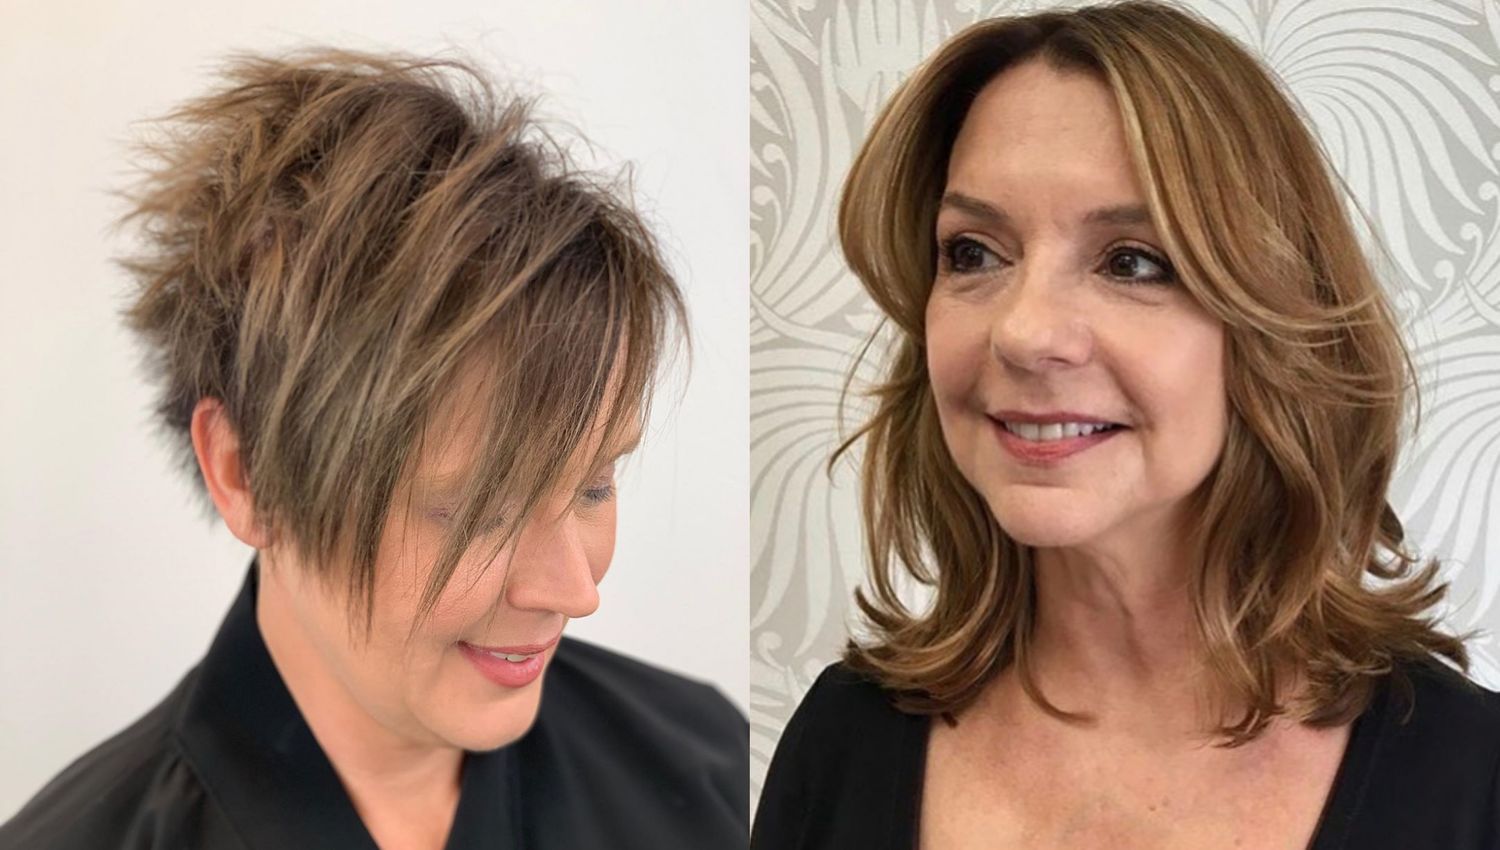 80 Exemplary Short Hairstyles for Women Over 50 With Thin Hair